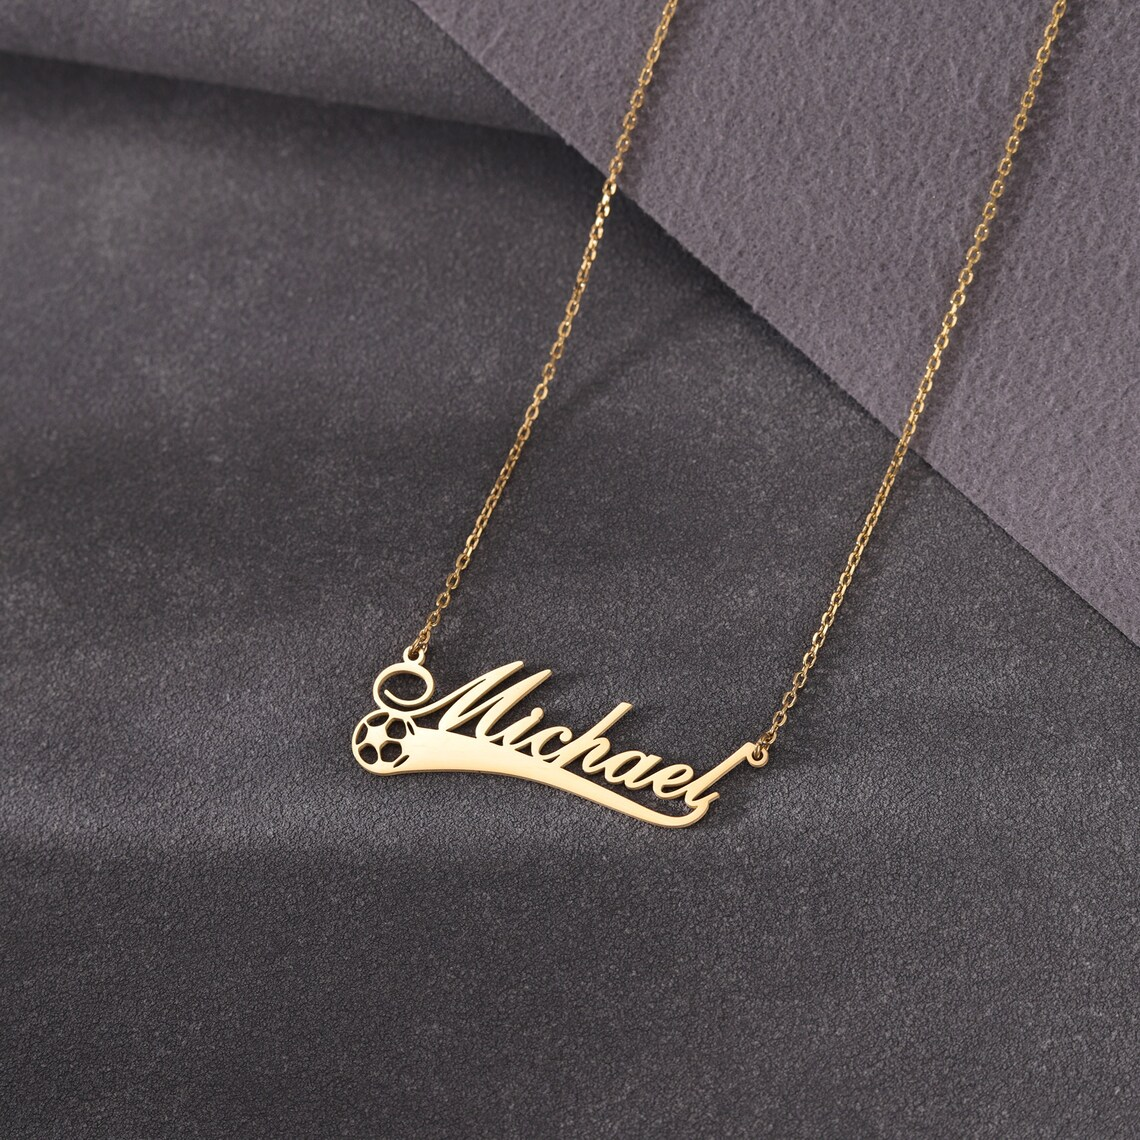 Gold Plated Soccer Personalized Name Necklace